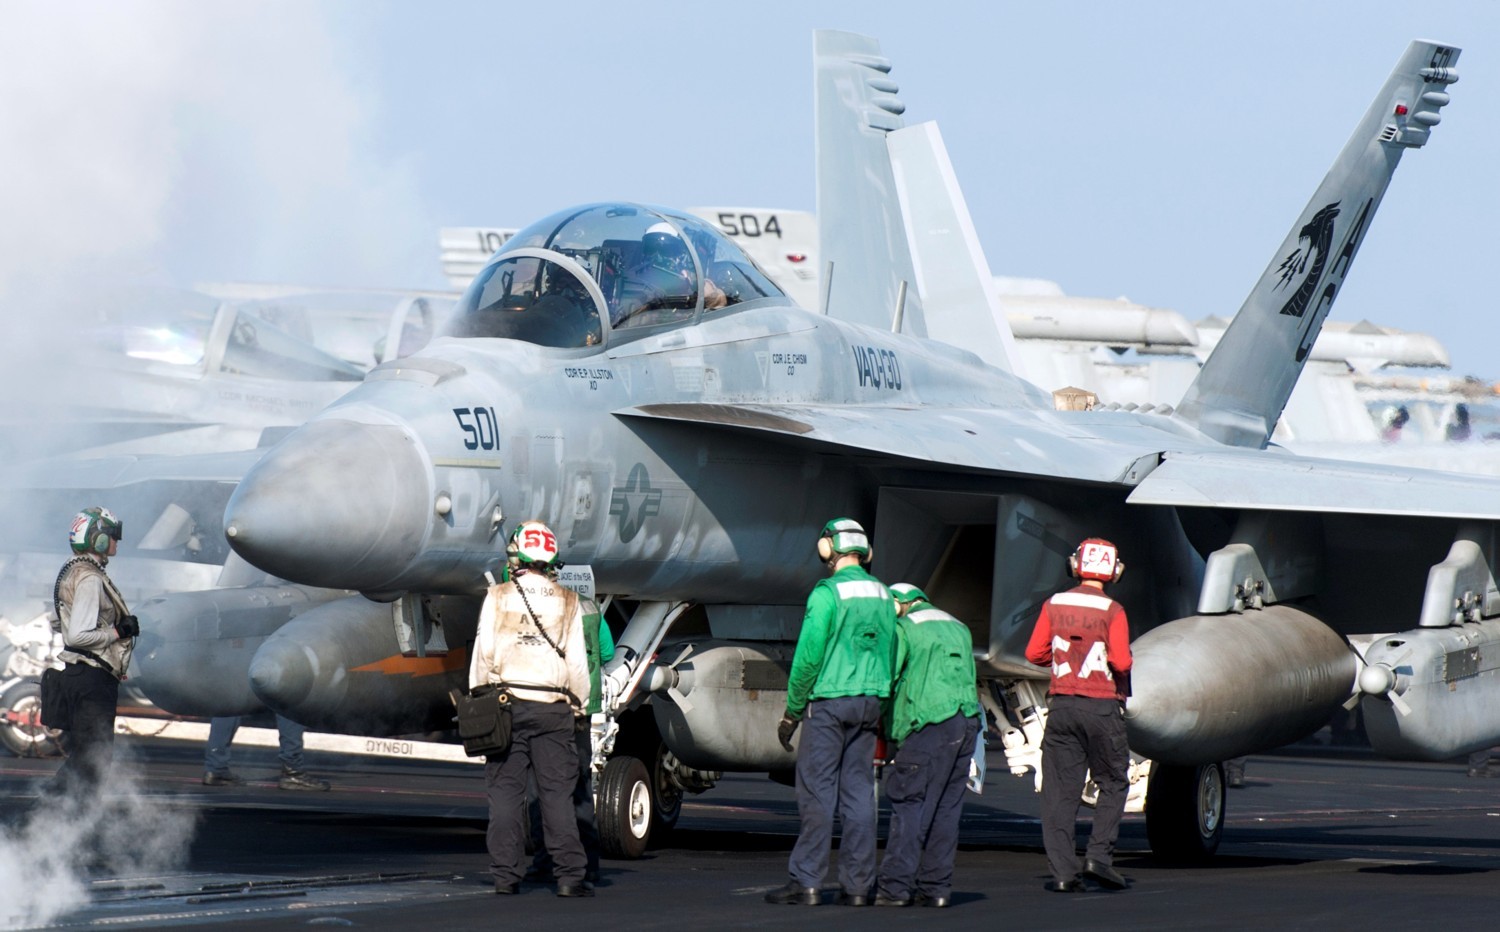 vaq-130 zappers electronic attack squadron vaqron us navy boeing ea-18g growler aircraft carrier air wing cvw-3 uss harry s. truman cvn-75 122